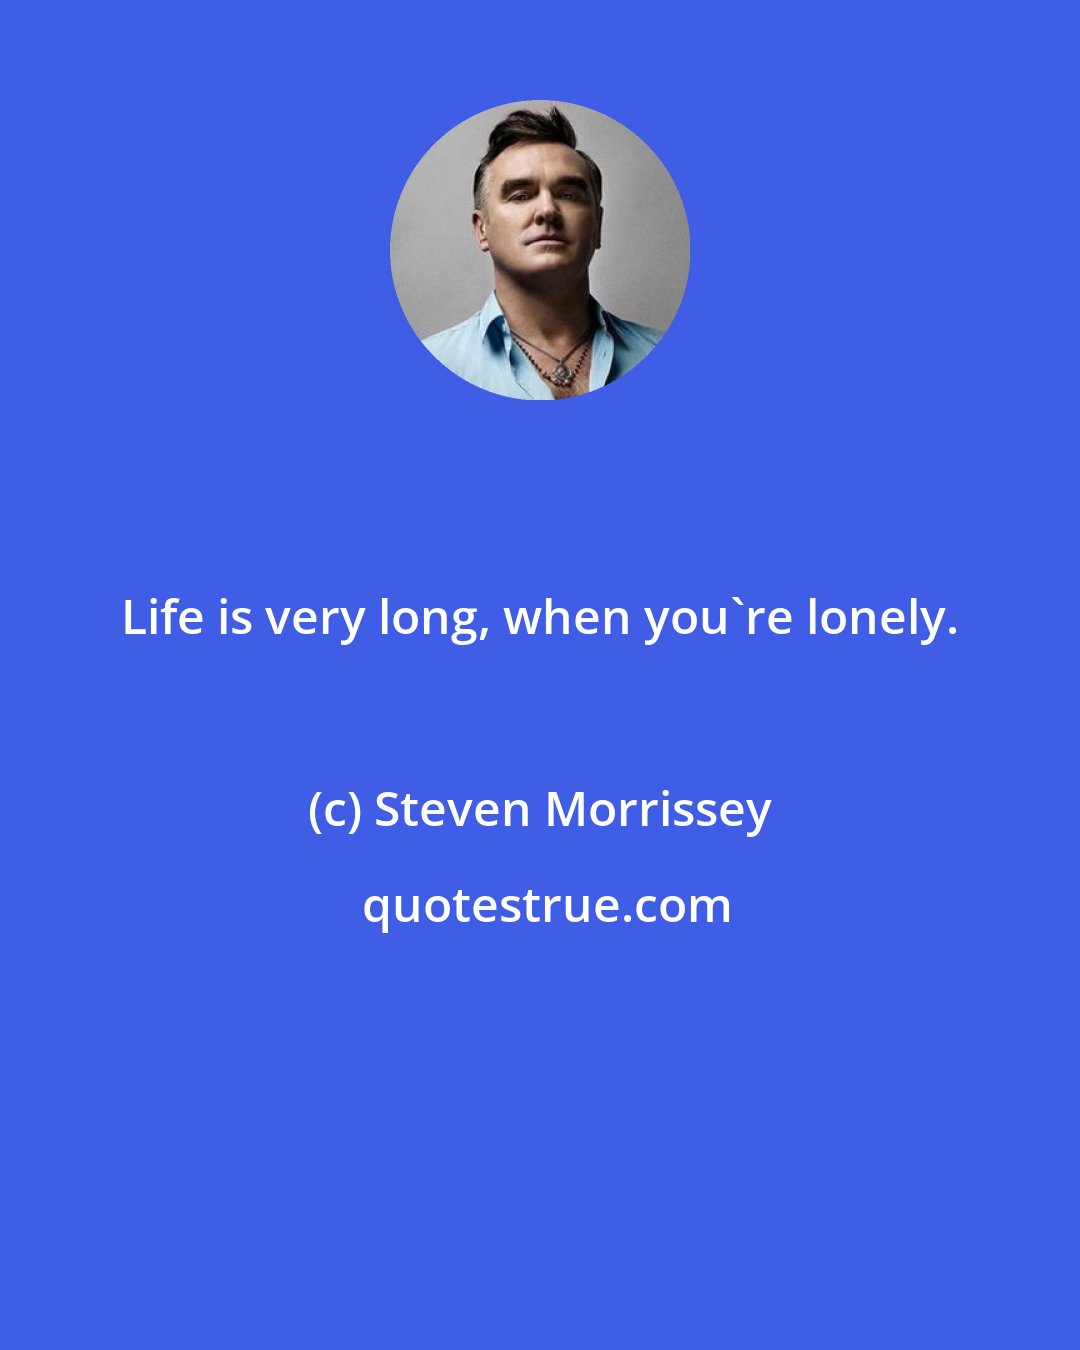 Steven Morrissey: Life is very long, when you're lonely.